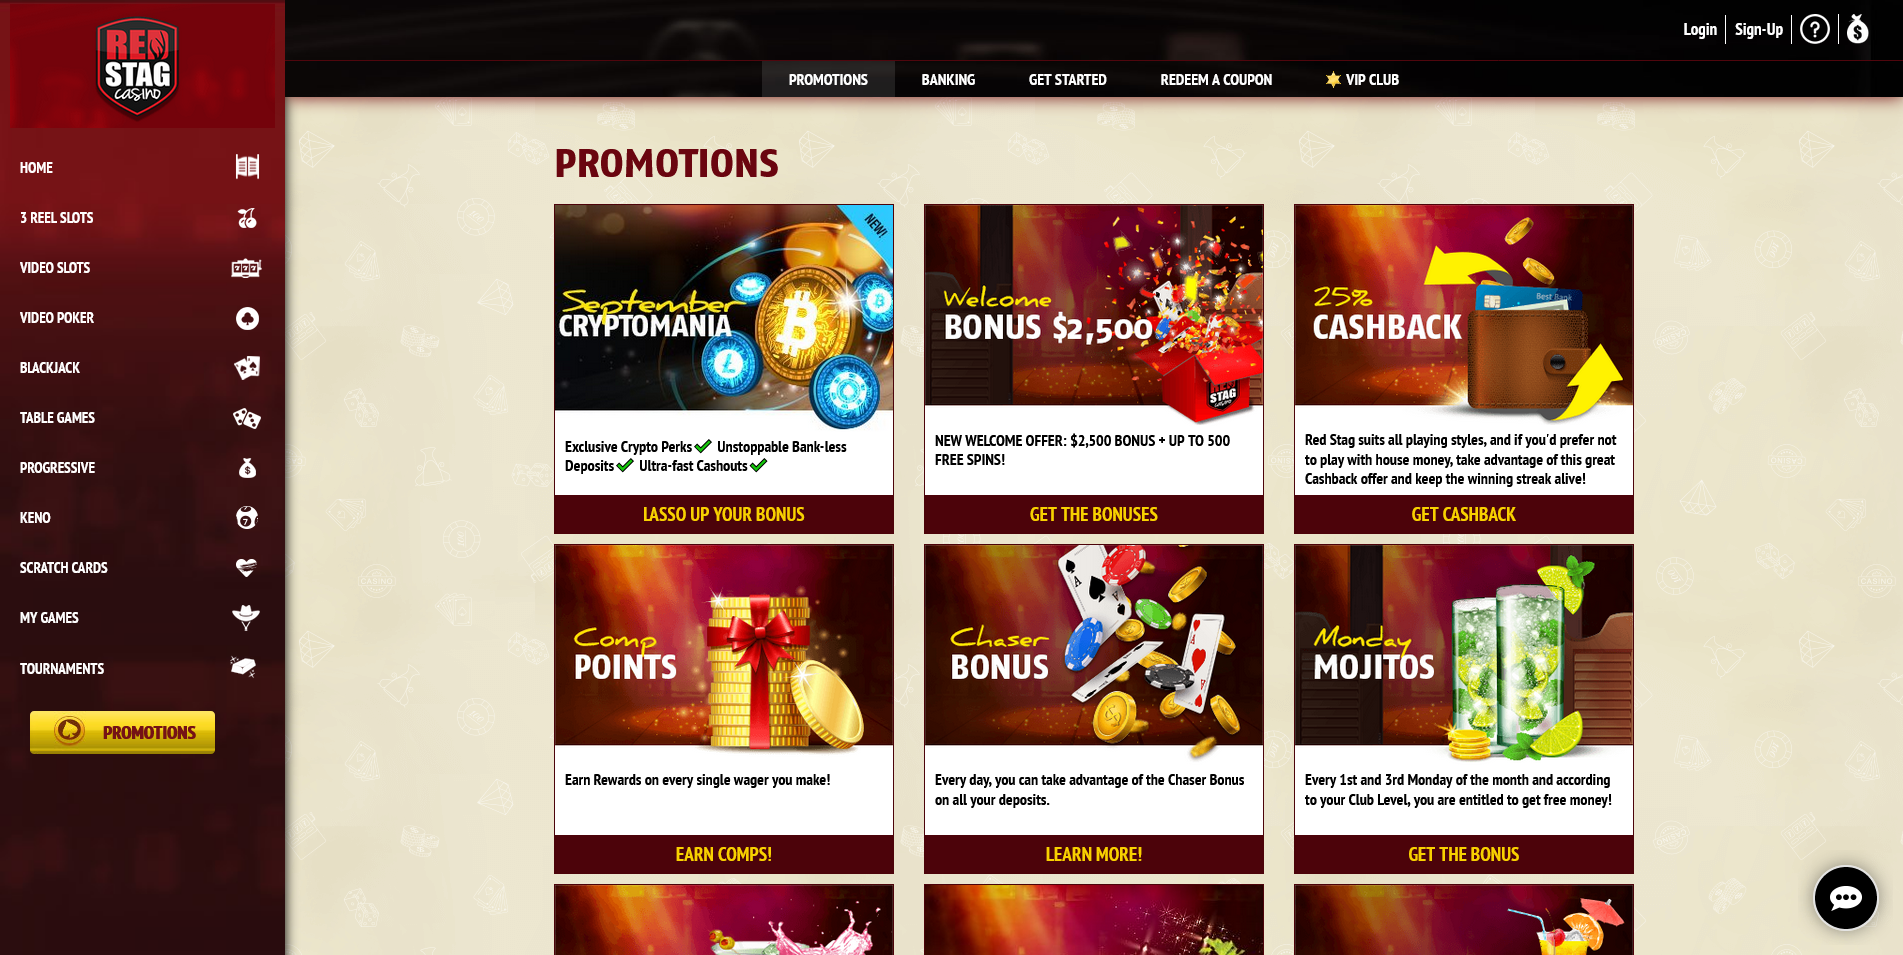 Screenshot of the RedStag Casino Promotions Page